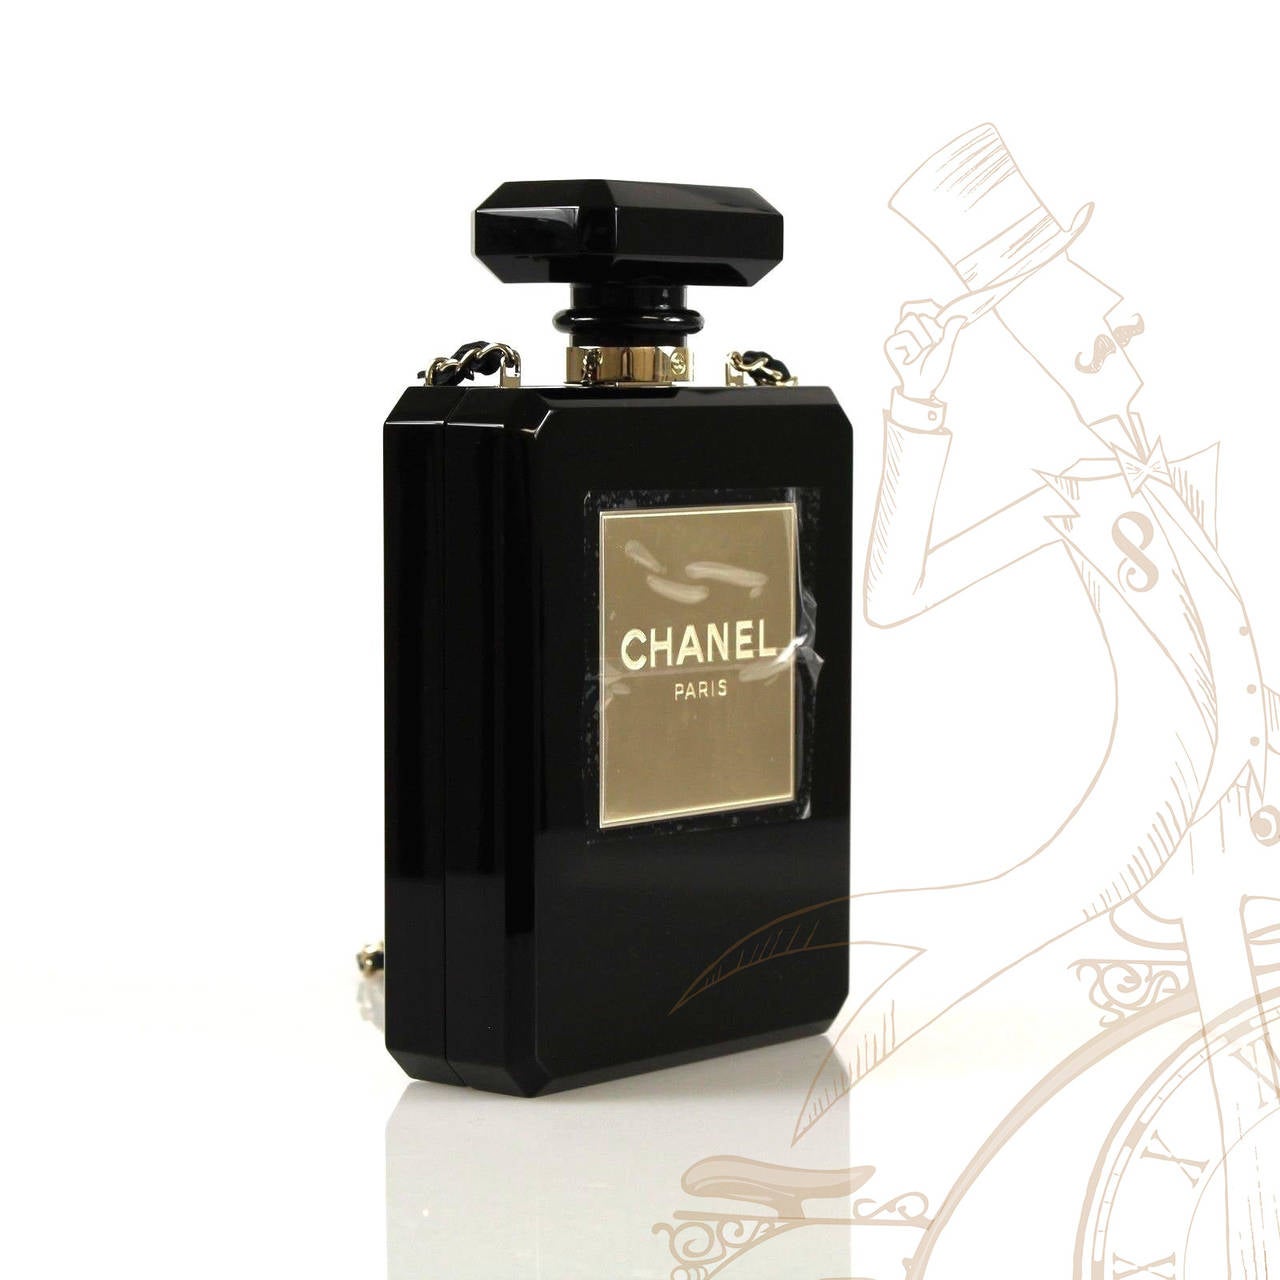 Limited Edition sold out CHANEL perfume bottle bag in black plexi glass! This fabulous piece is worn as a clutch or shoulder. The absolute timeless essence of CHANEL! Black leather interior. Signature CHANEL stamp inside the bag. Serial number on